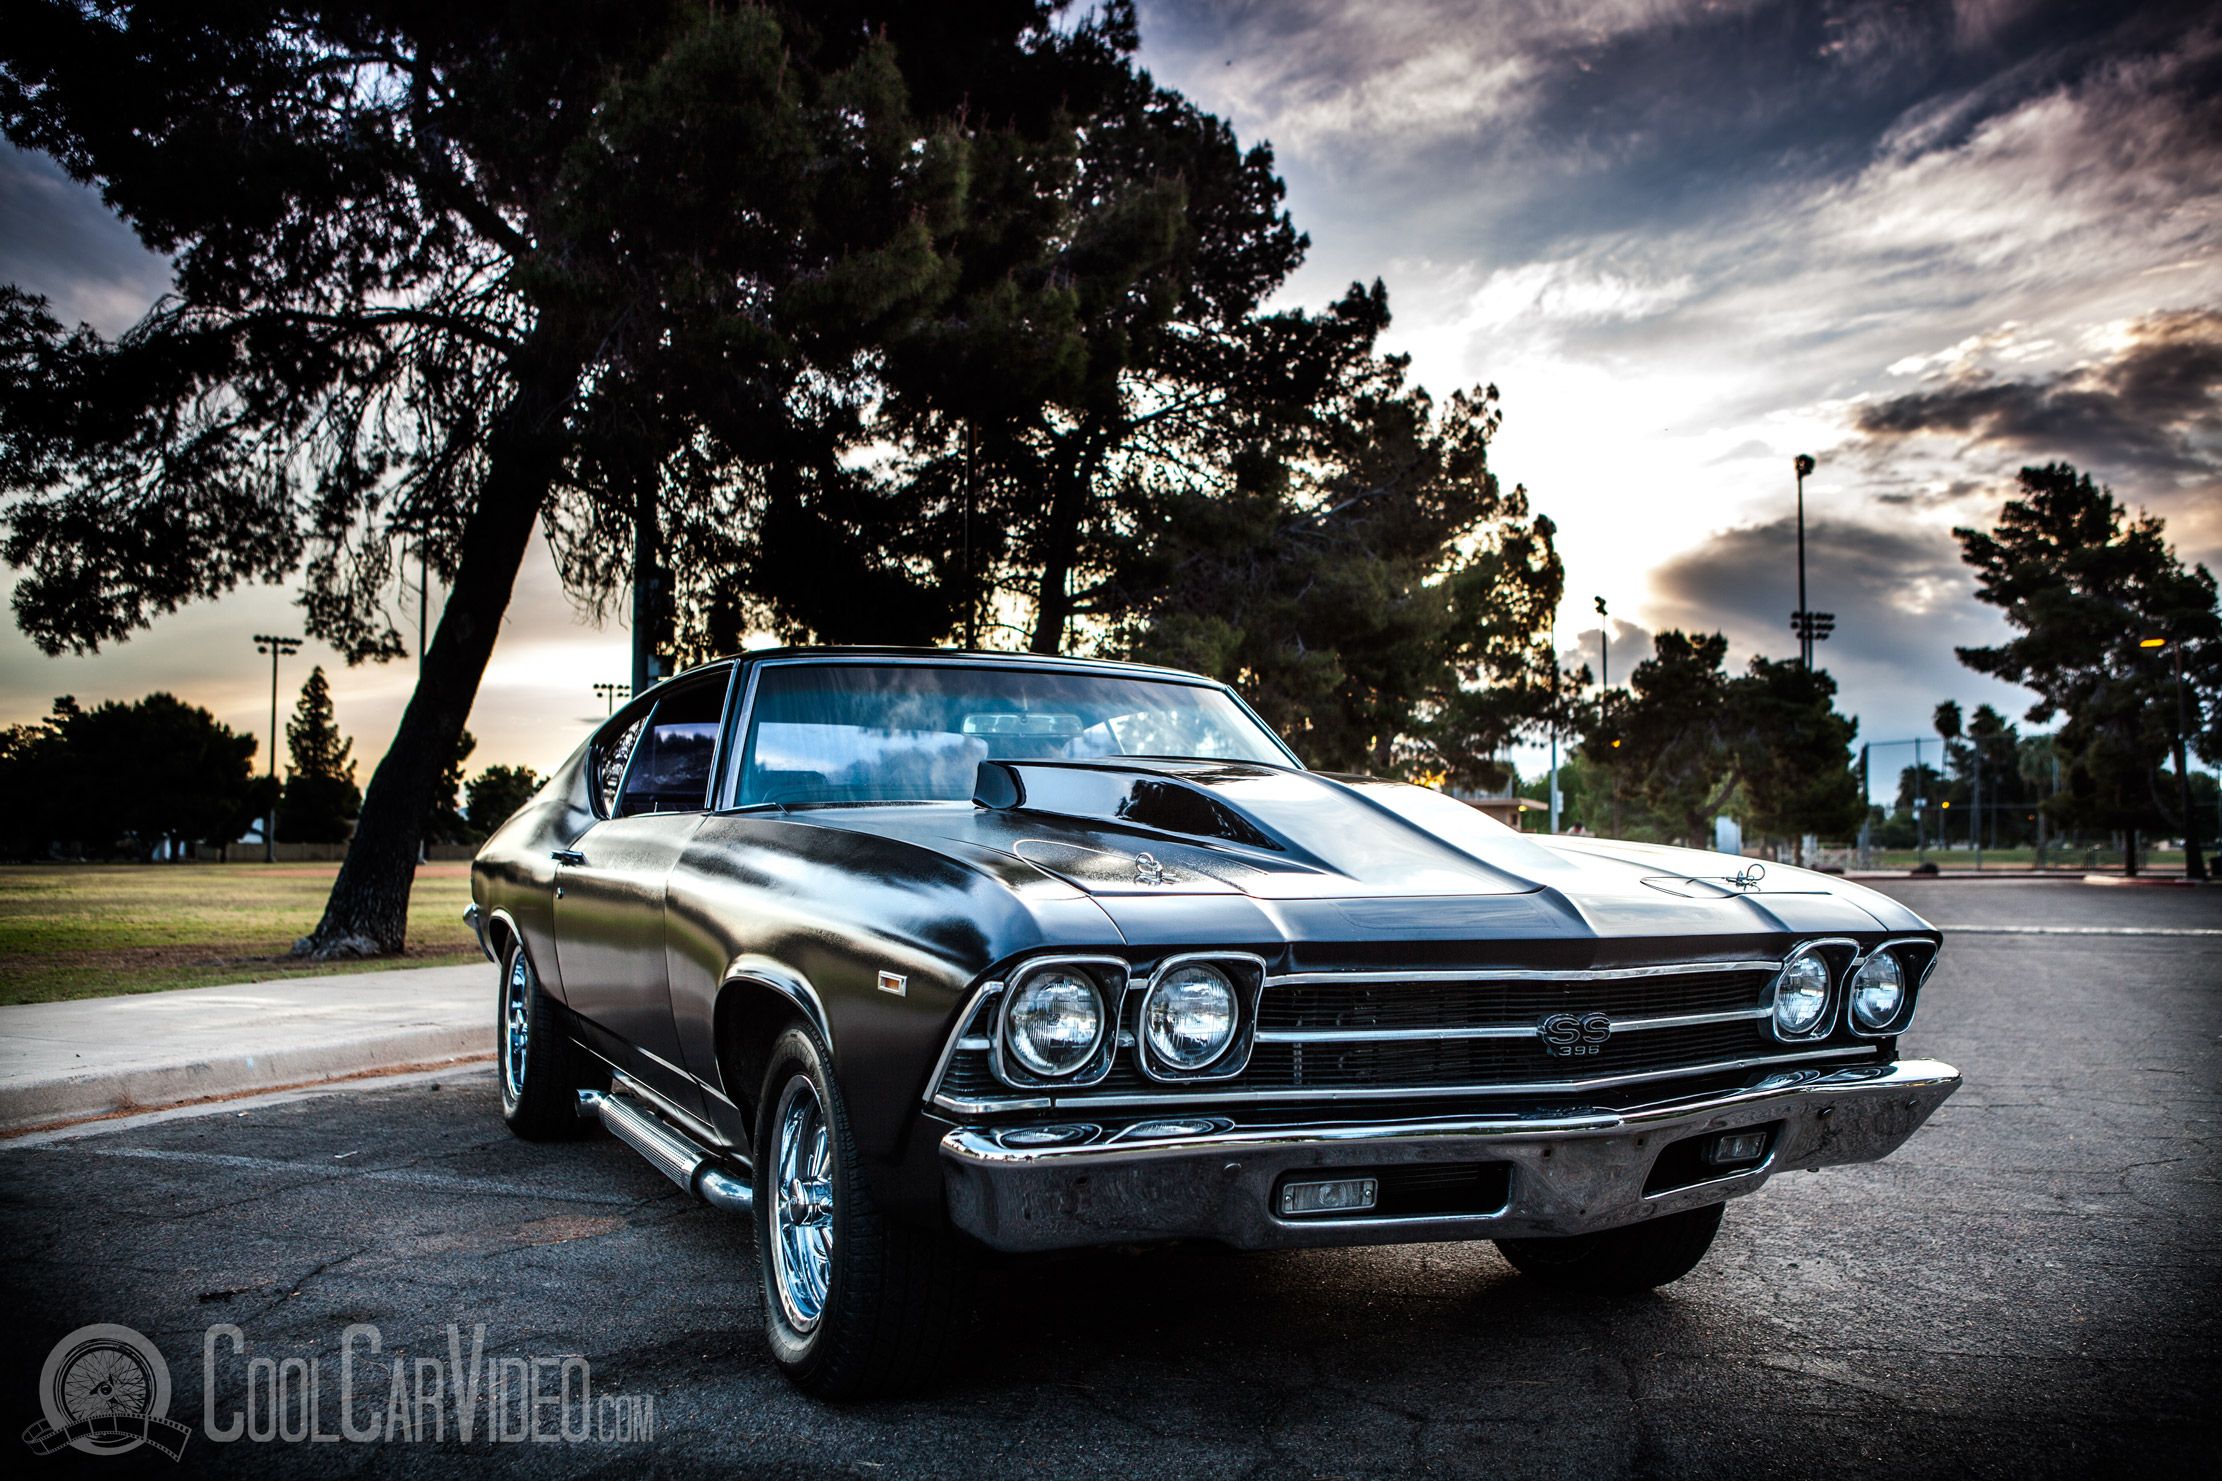 Chevelle SS with 454coolcarvideo.com